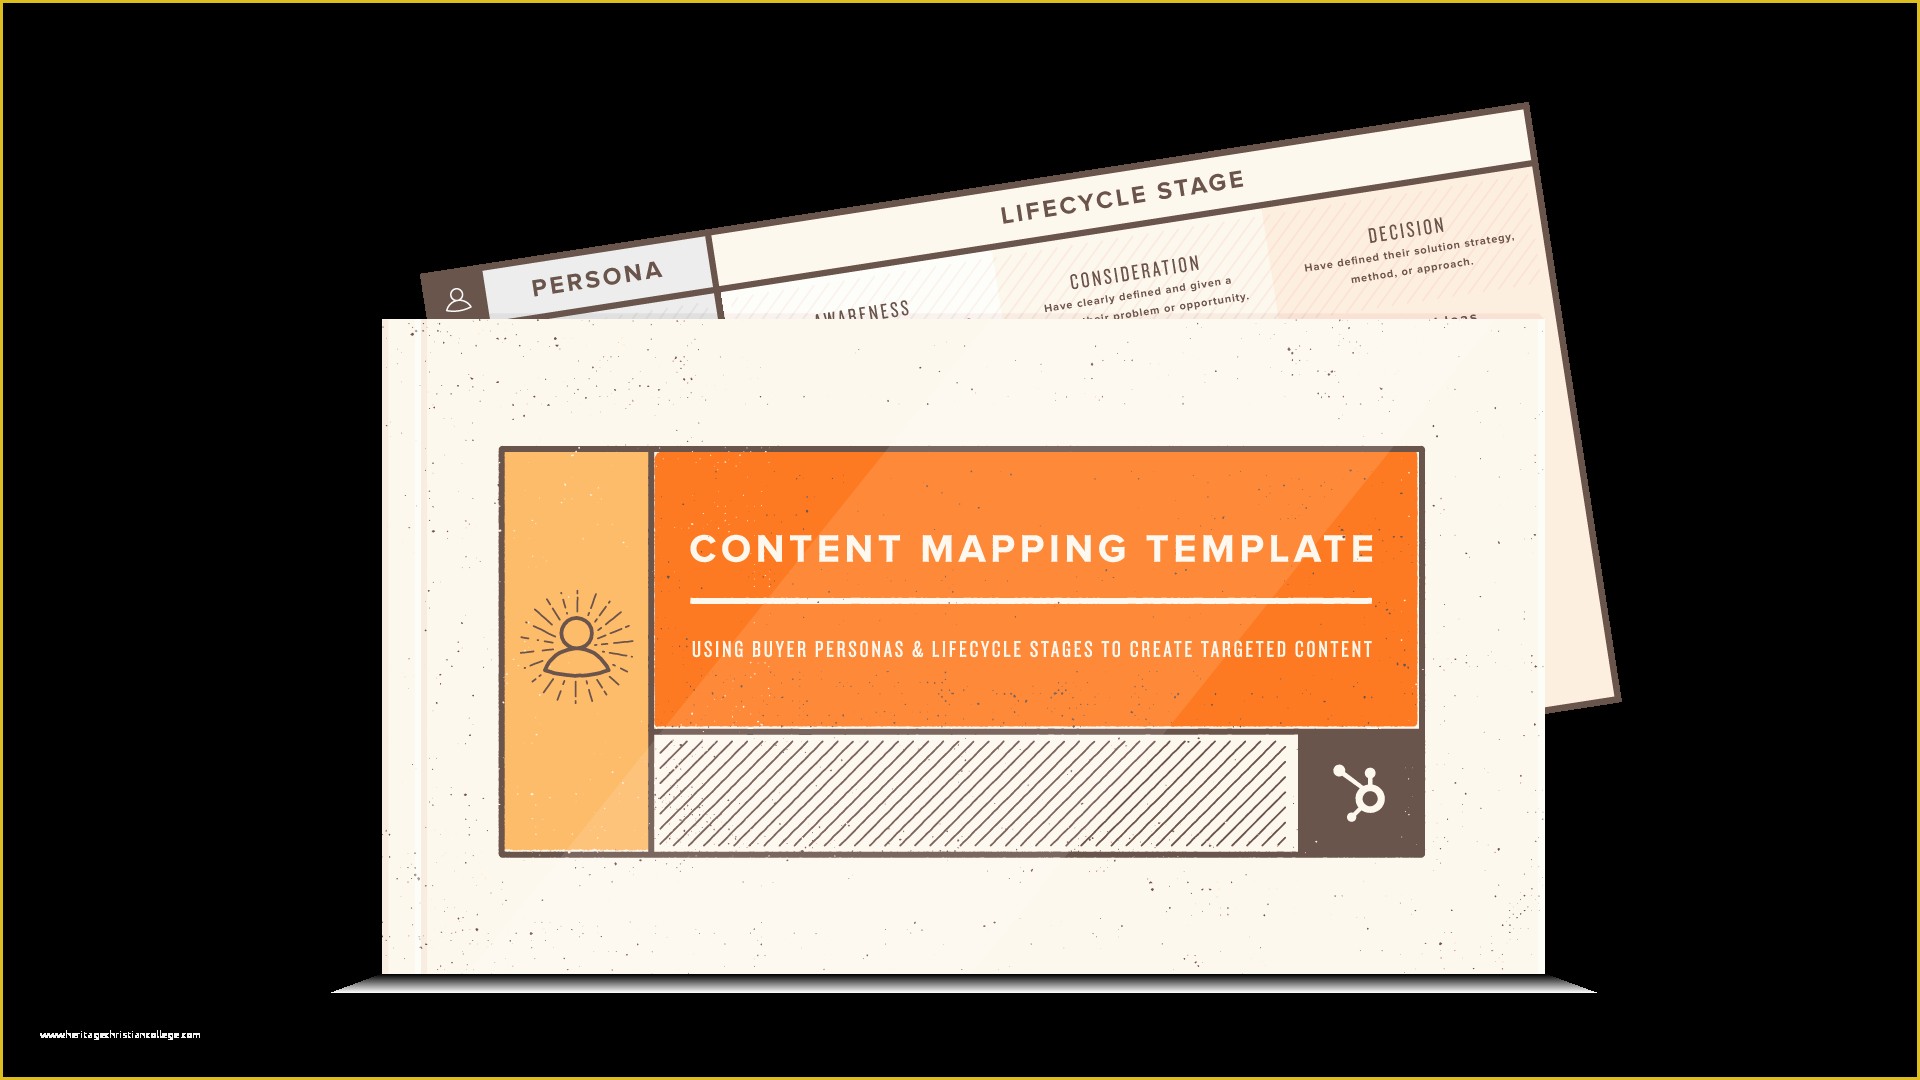 Free Hubspot Templates Of Content Mapping Template to Easily Create Tar Ed Content